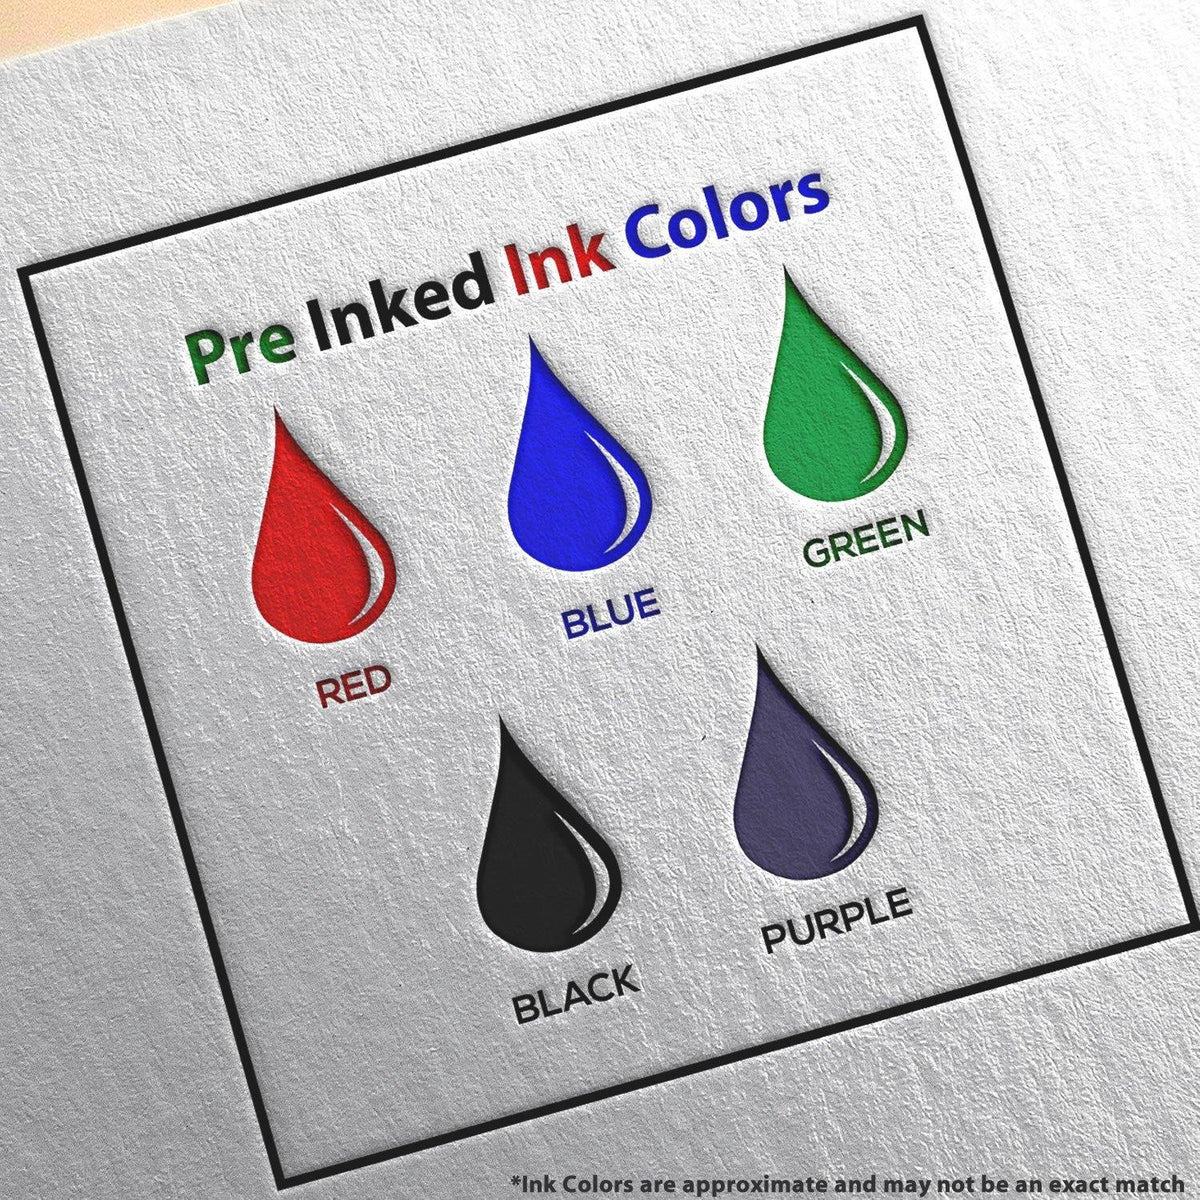 Slim Pre-Inked Economy Mail Stamp Ink Color Options